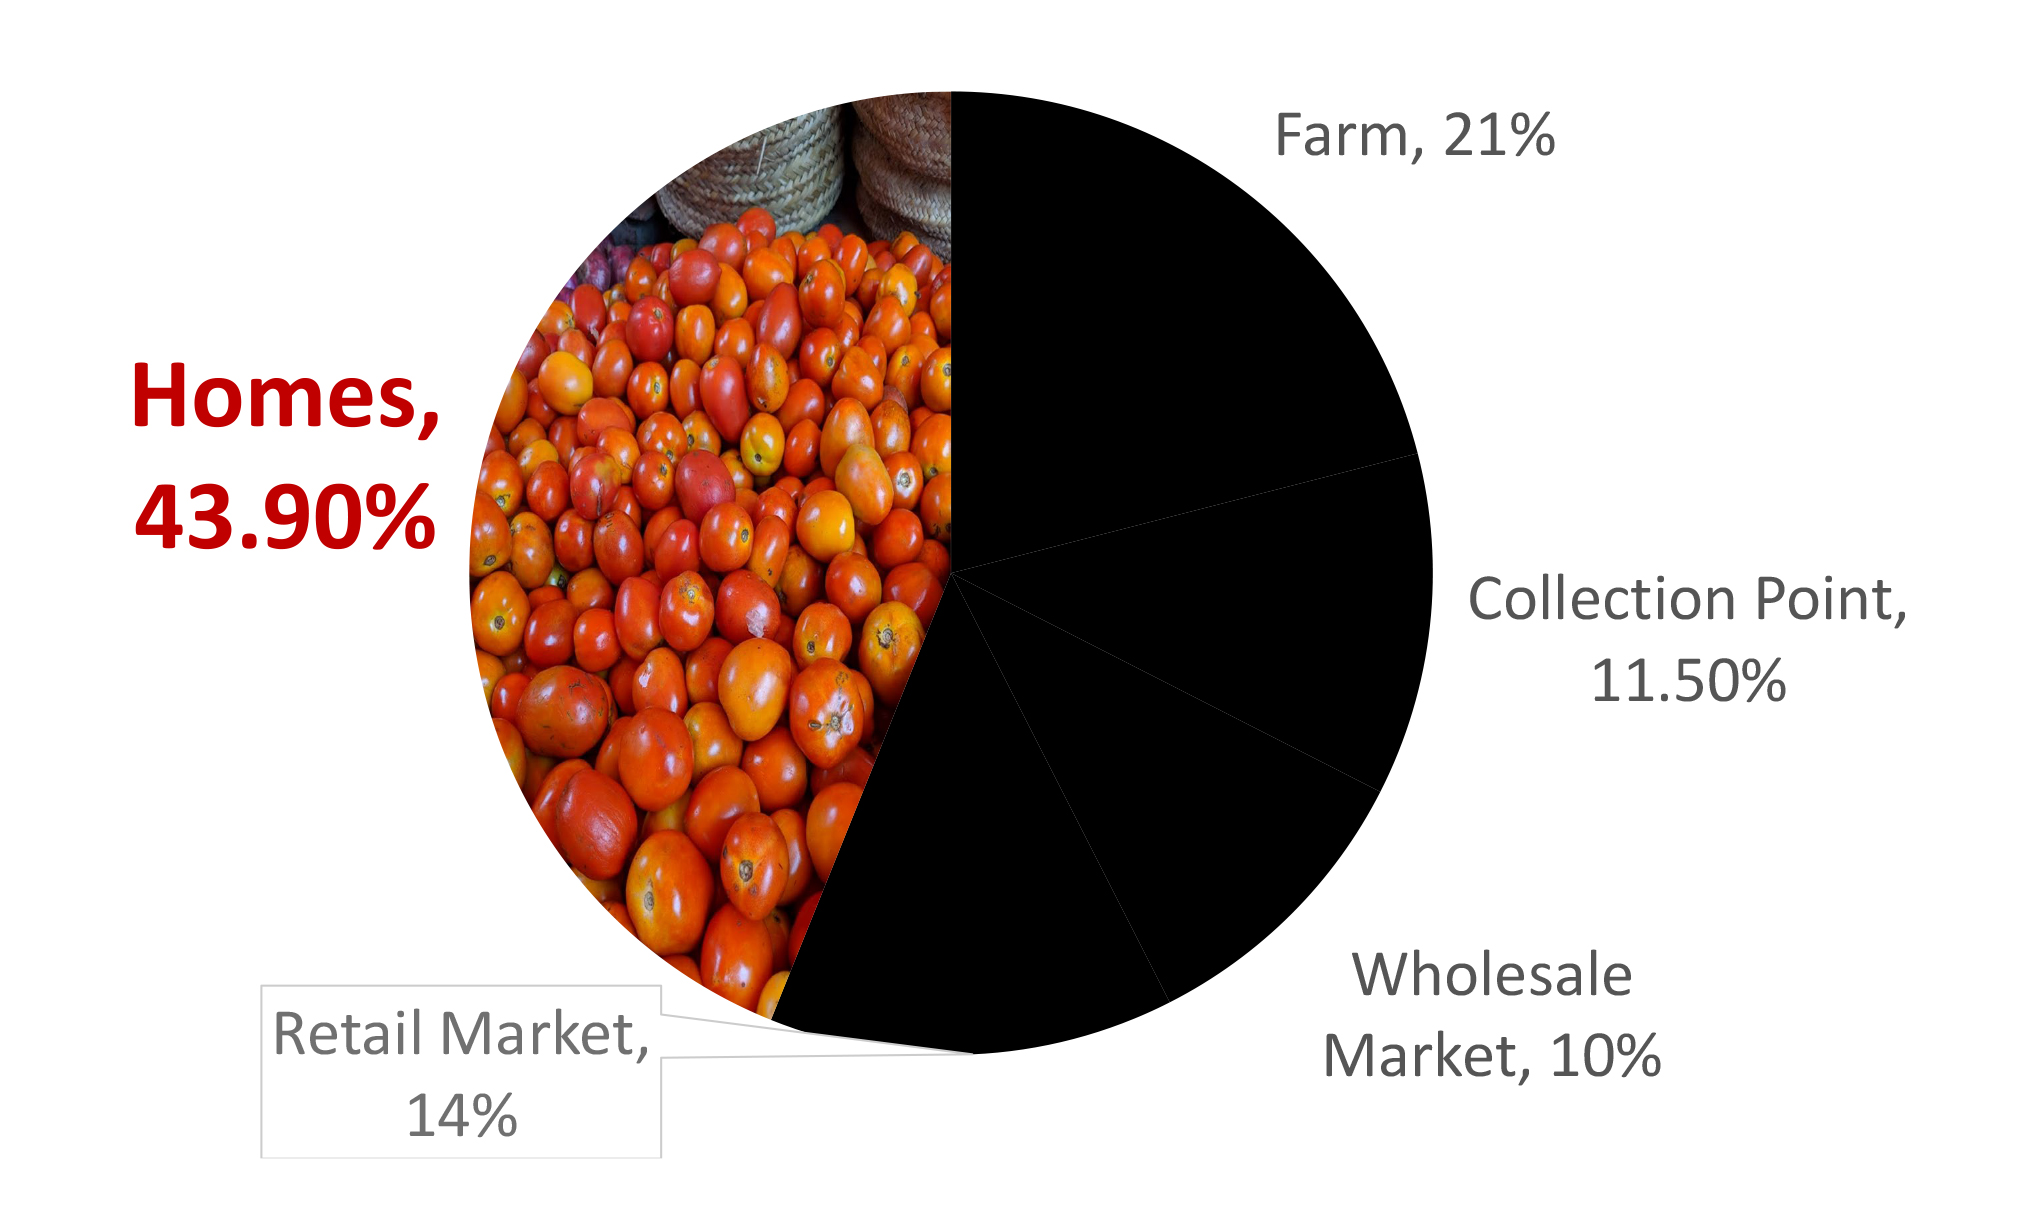 Pie chart showes that 43.9% of tomatoes harvested end up in homes, after 21% are lost on the farm, 11.5% lost at collection points, 10% lost at the wholesale market, and 14% are lost at retail.